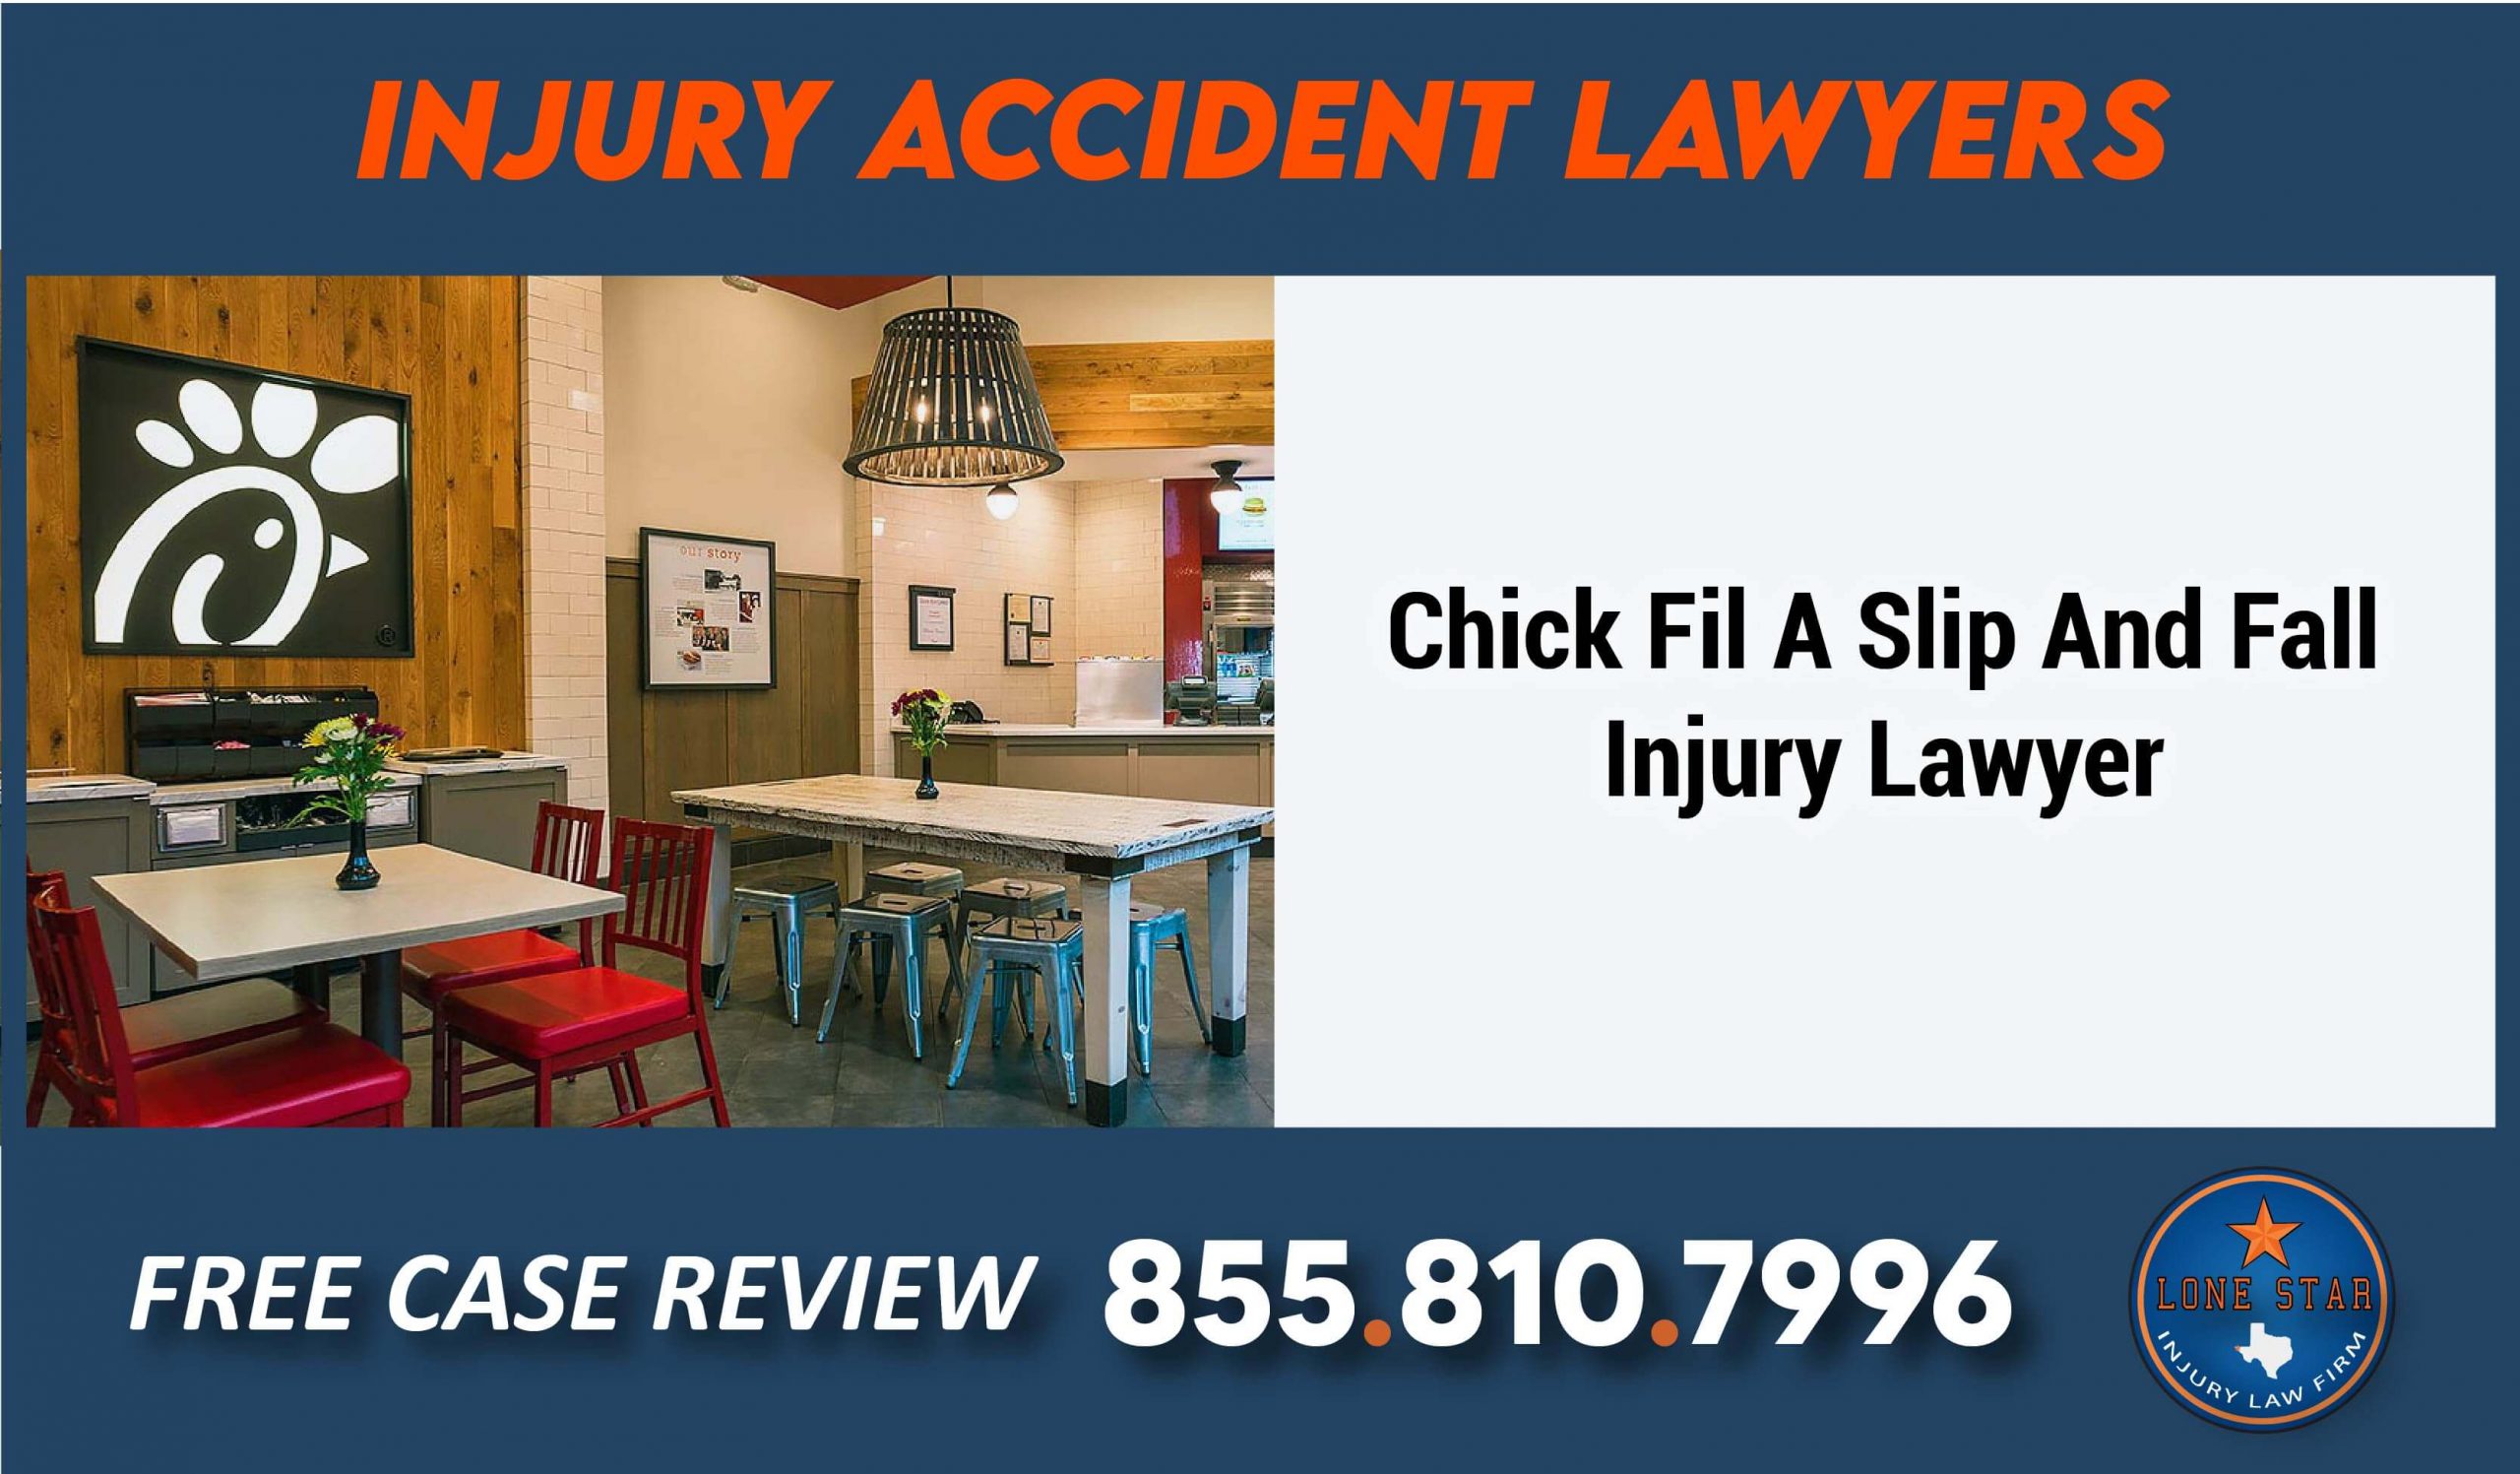 Chick Fil A Slip And Fall Injury Lawyer lawsuit sue compensation lawyer attorney liability incident